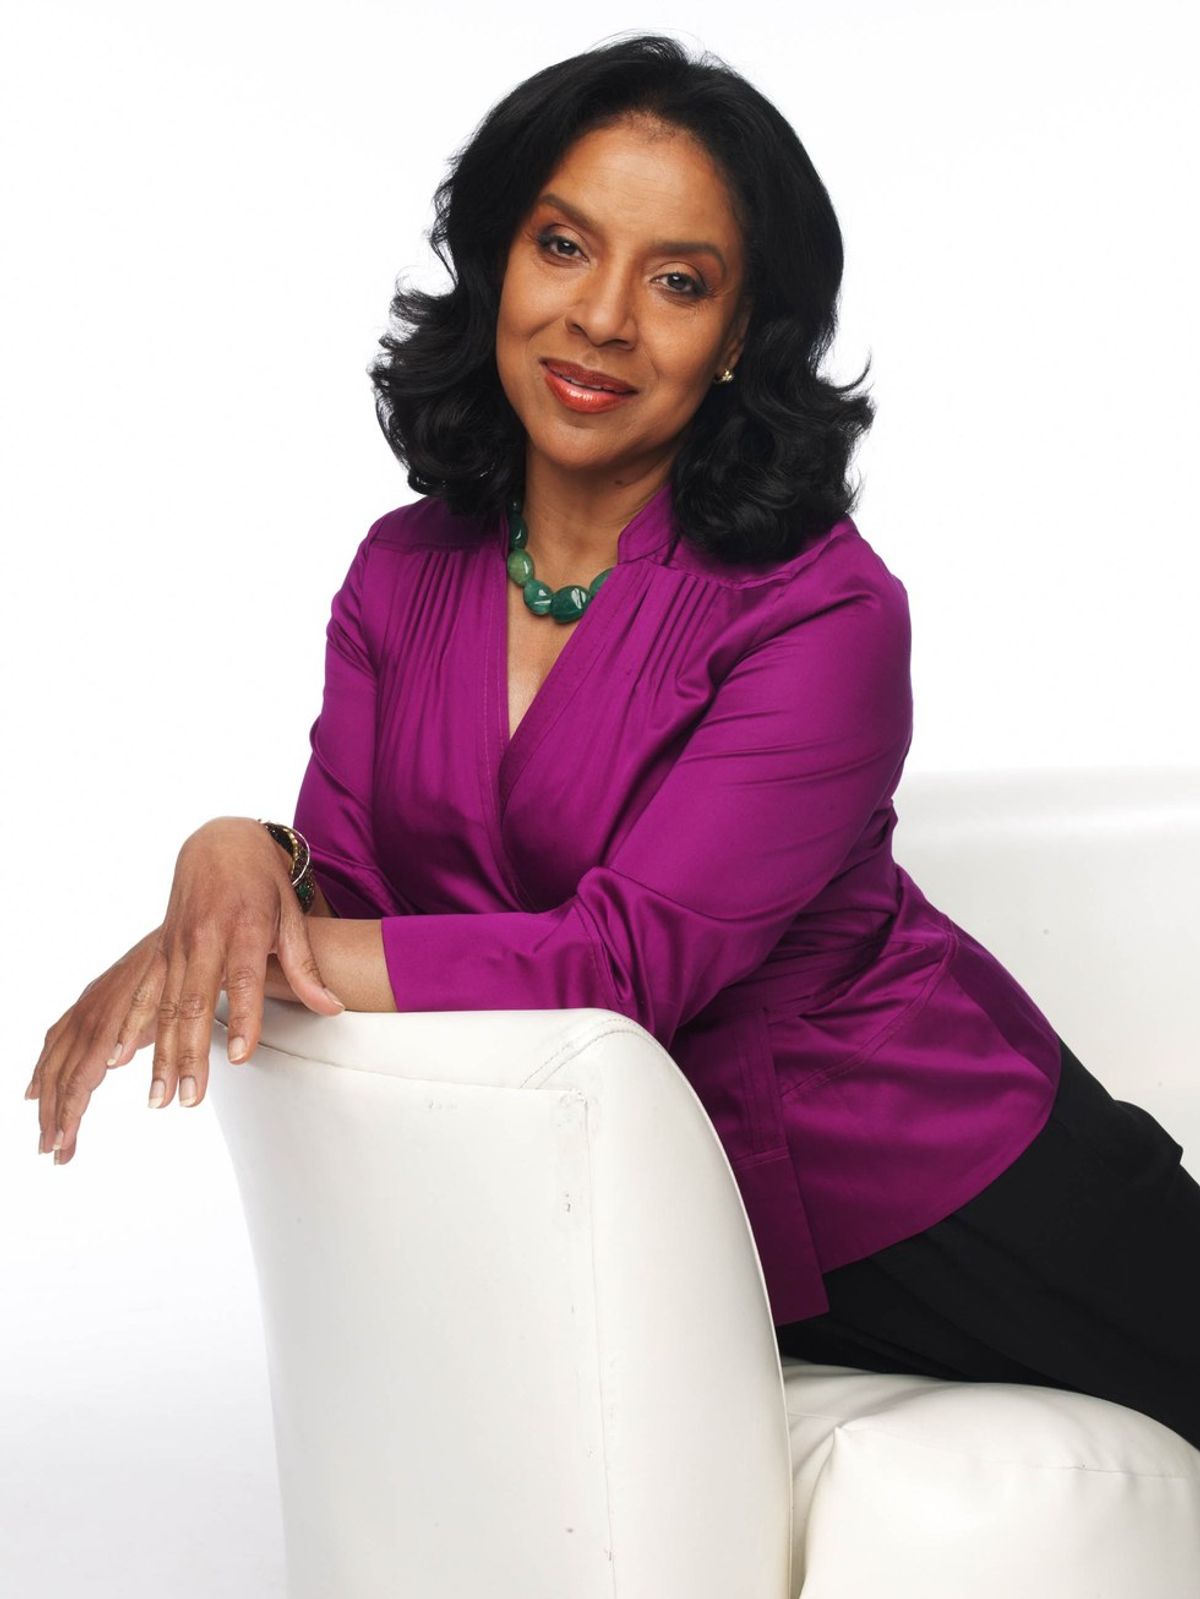 Self-Actualization Through The Eyes Of Phylicia Rashad